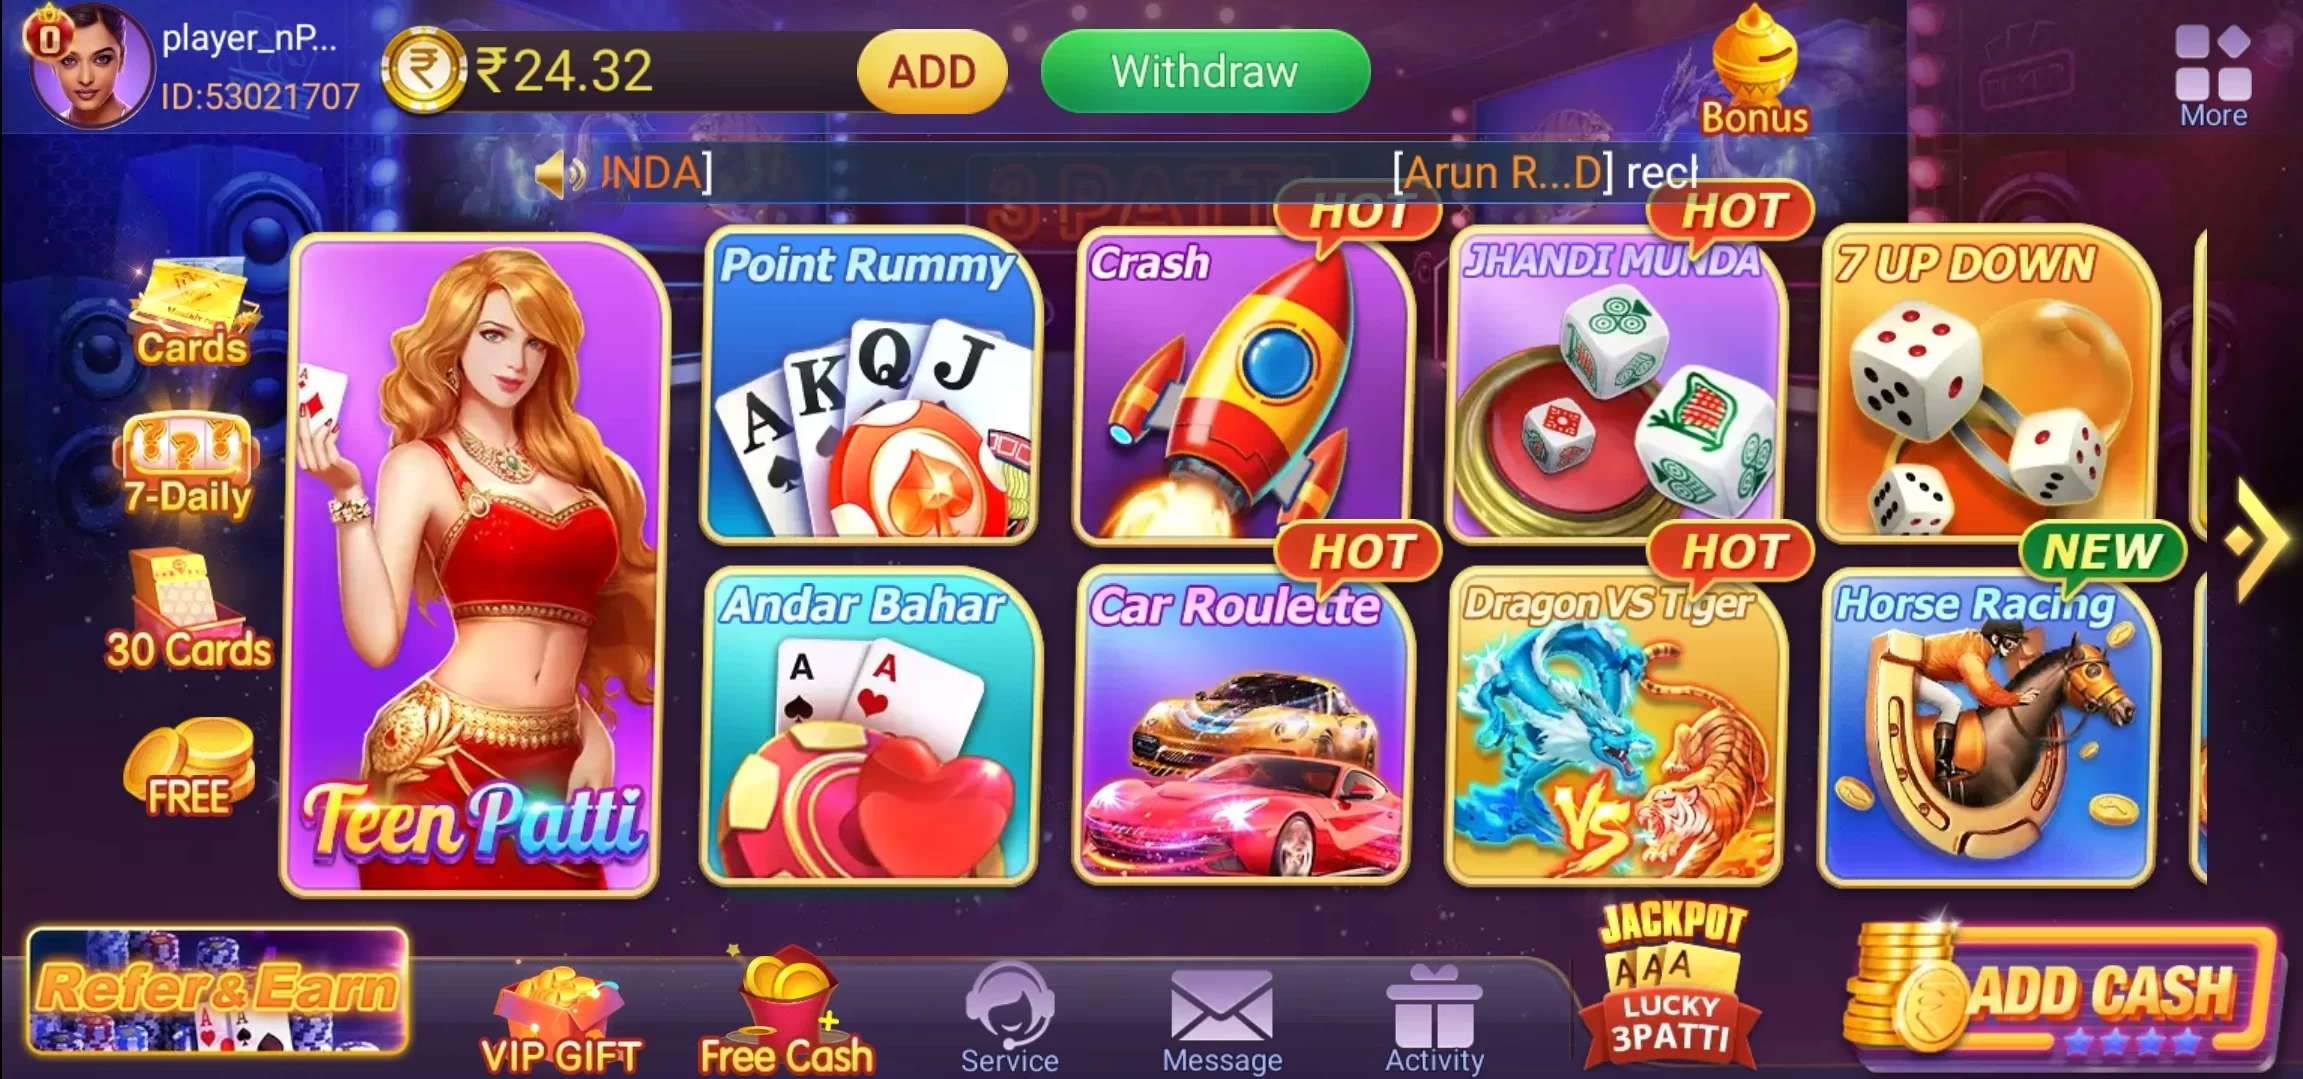 Games Available On Teen Patti Power App